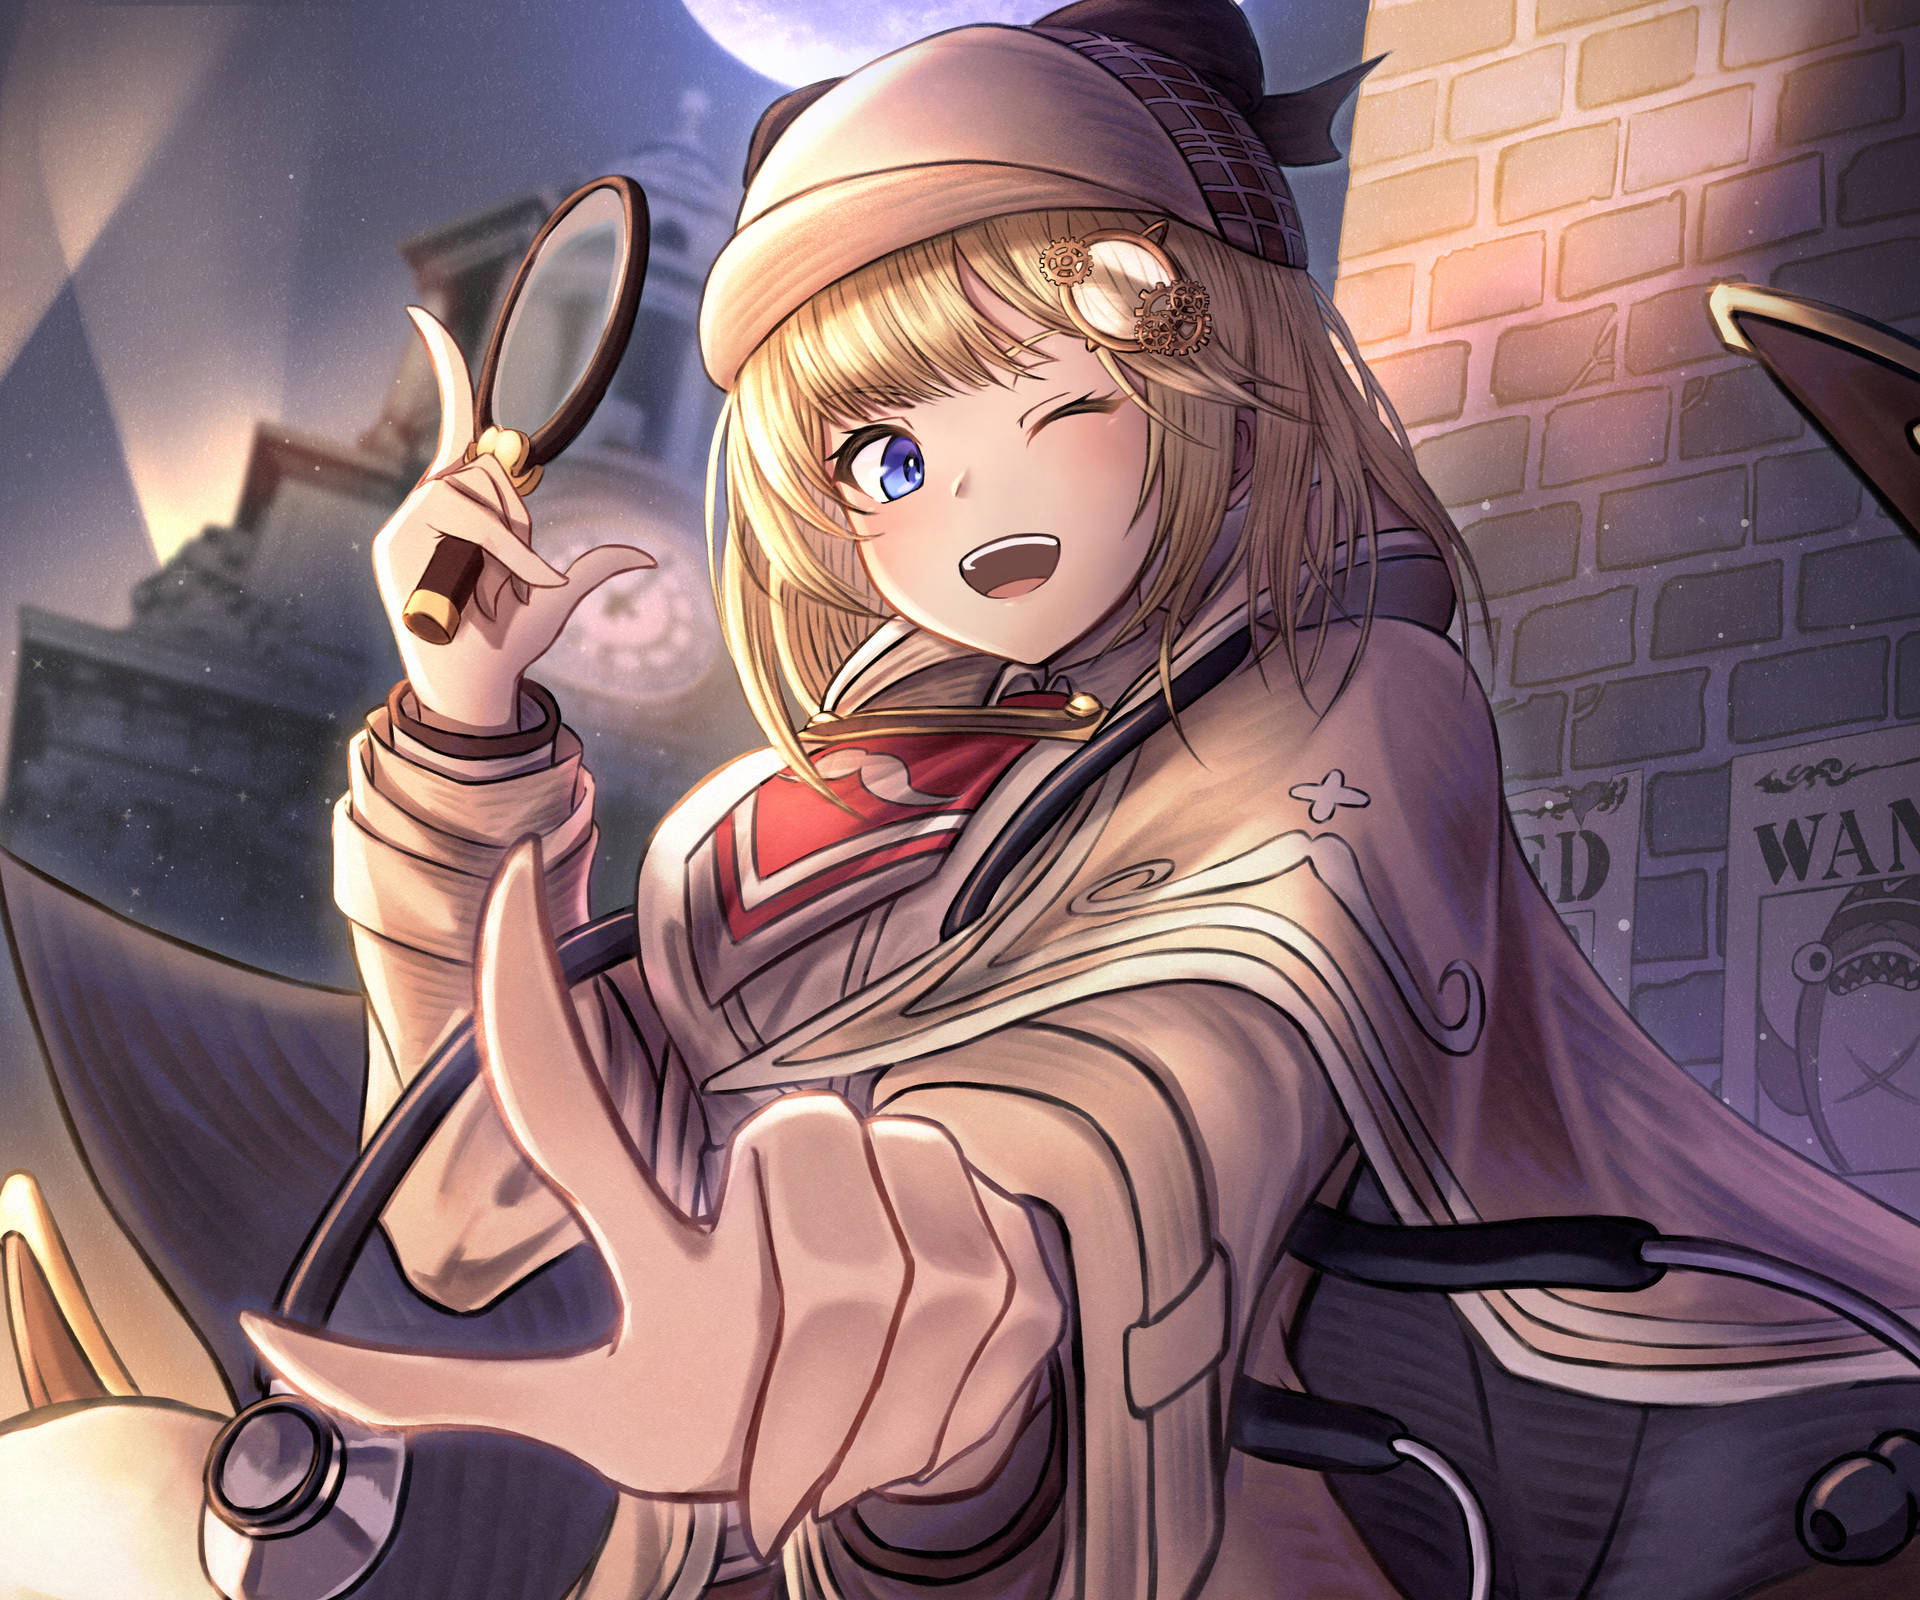 Watson Amelia in her Signature Detective Outfit Wallpaper